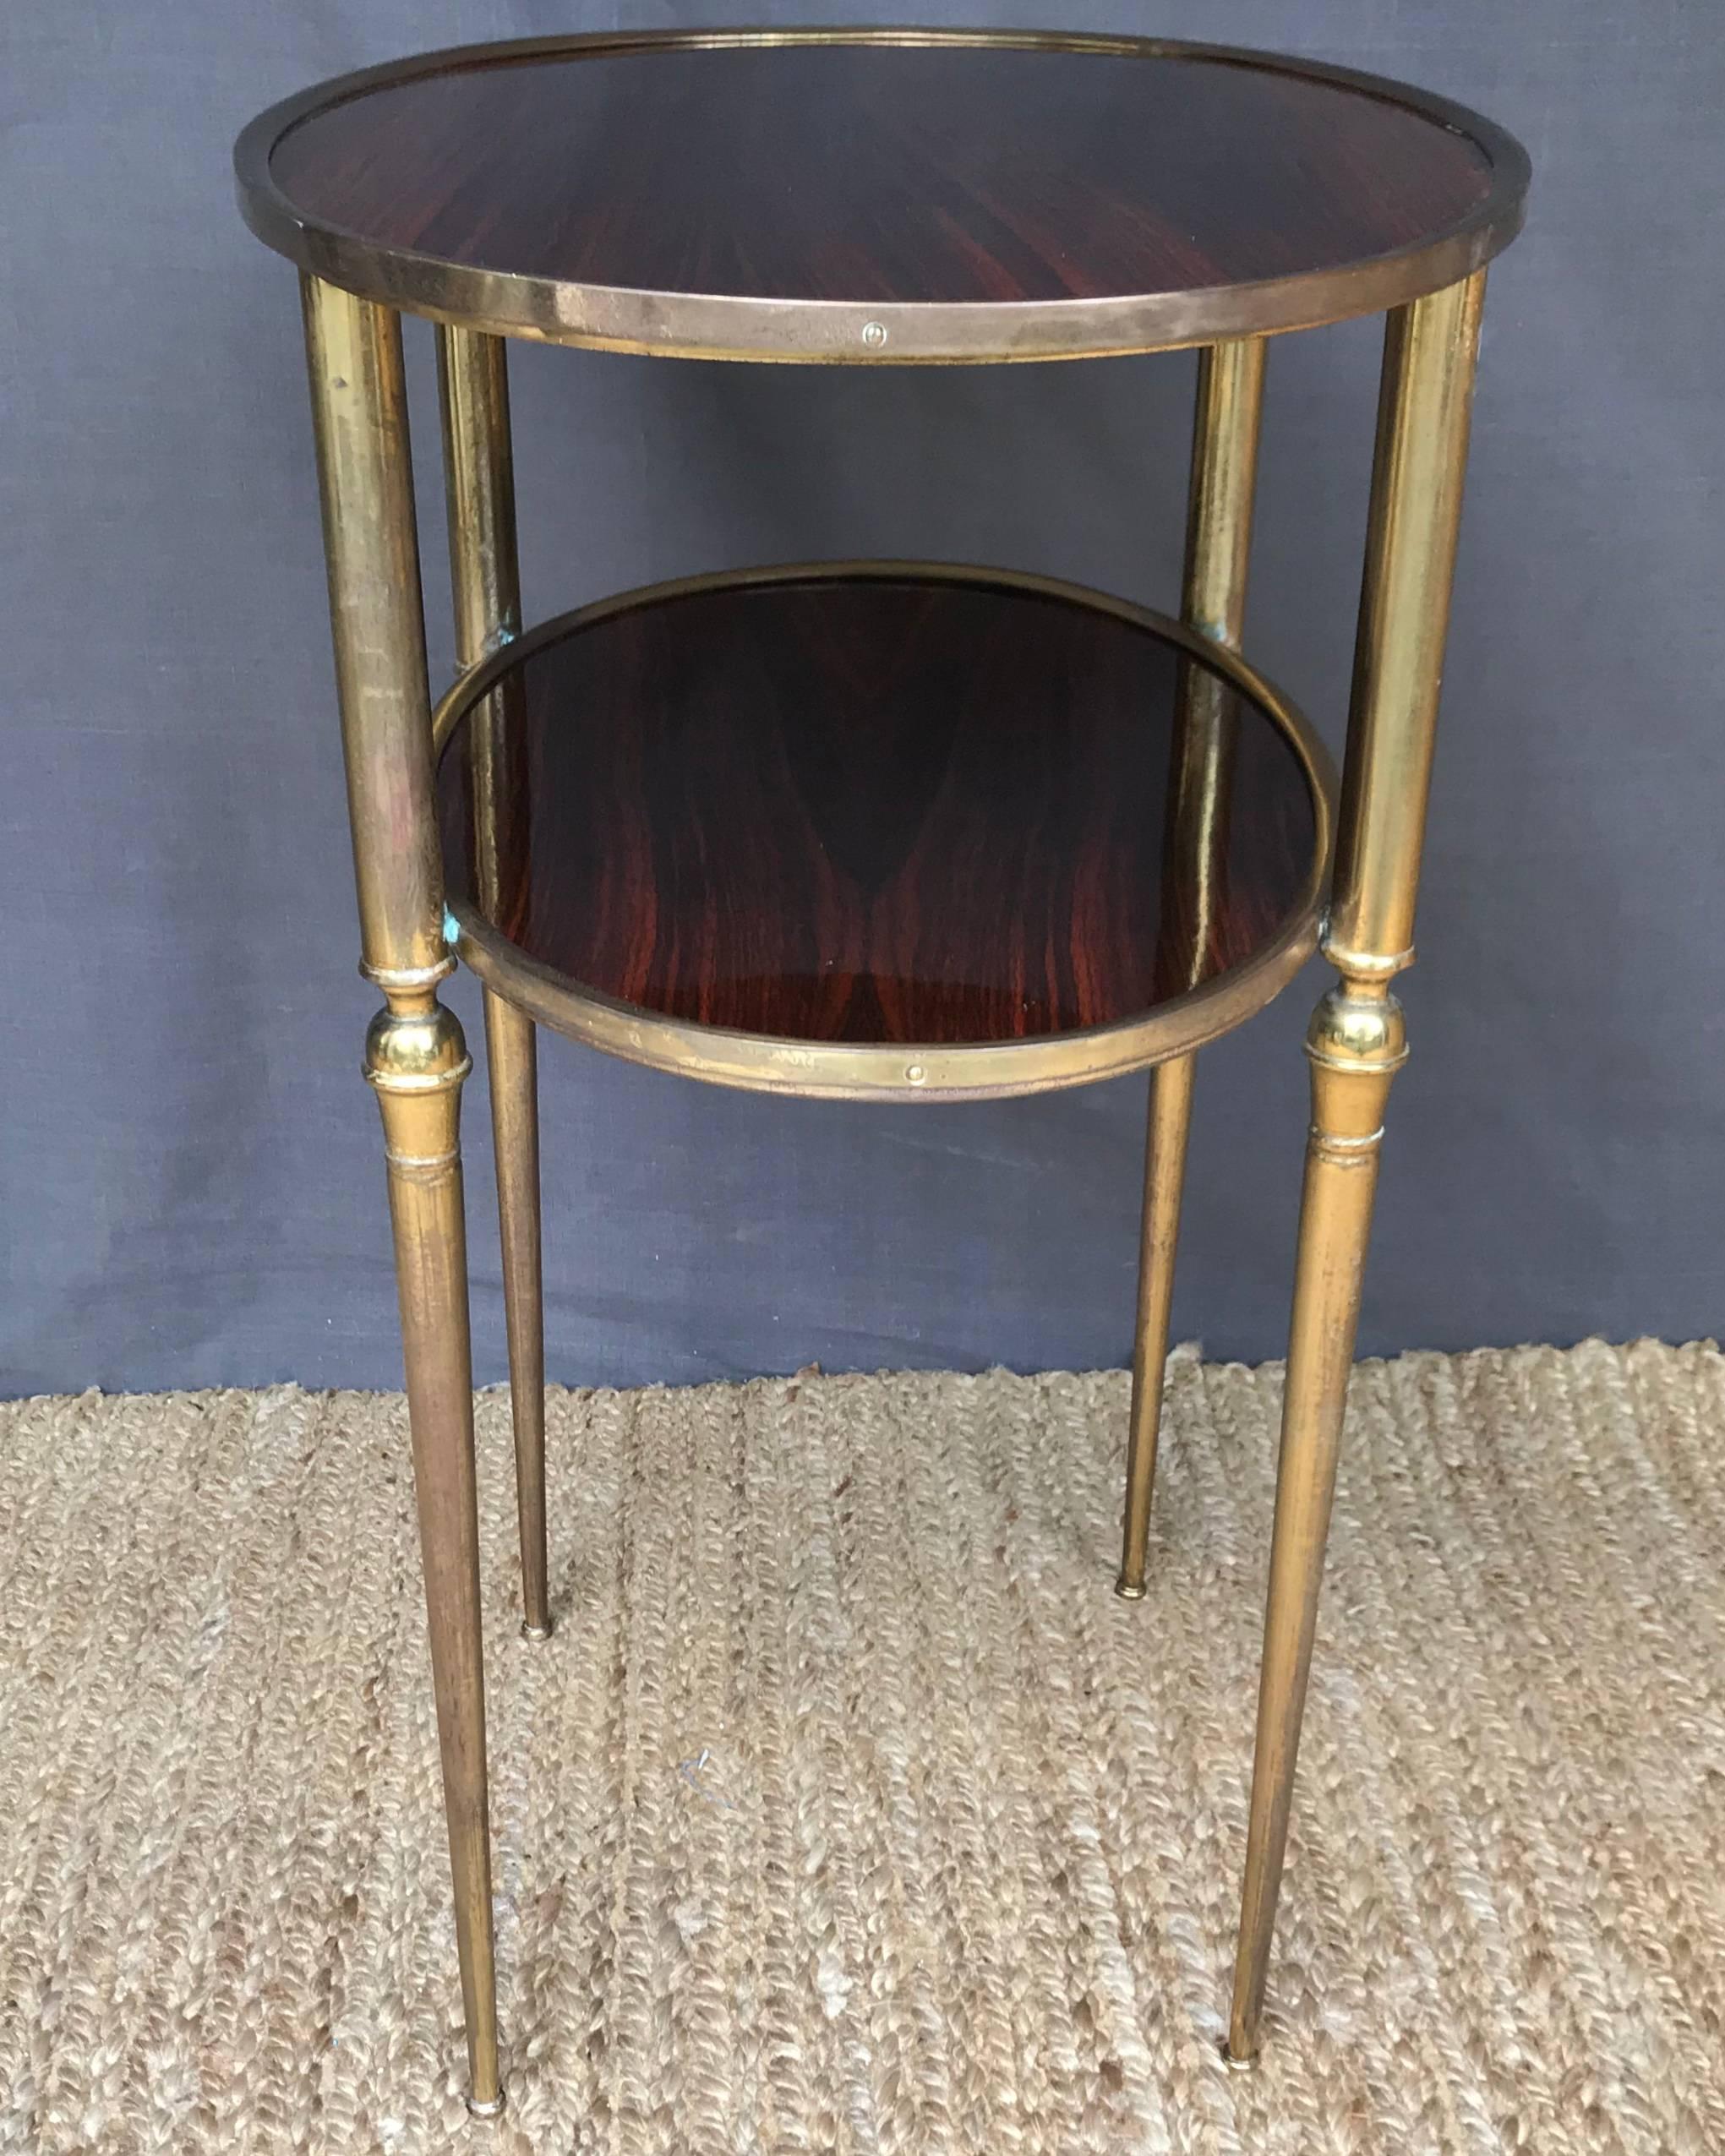 Mid-Century Modern Italian palisander and brass side table. Very chic two-tier side or cocktails/drinks table of newly re-polished palisander and vintage tapered brass legs, Italy, circa 1940. 
Dimensions: 20.5